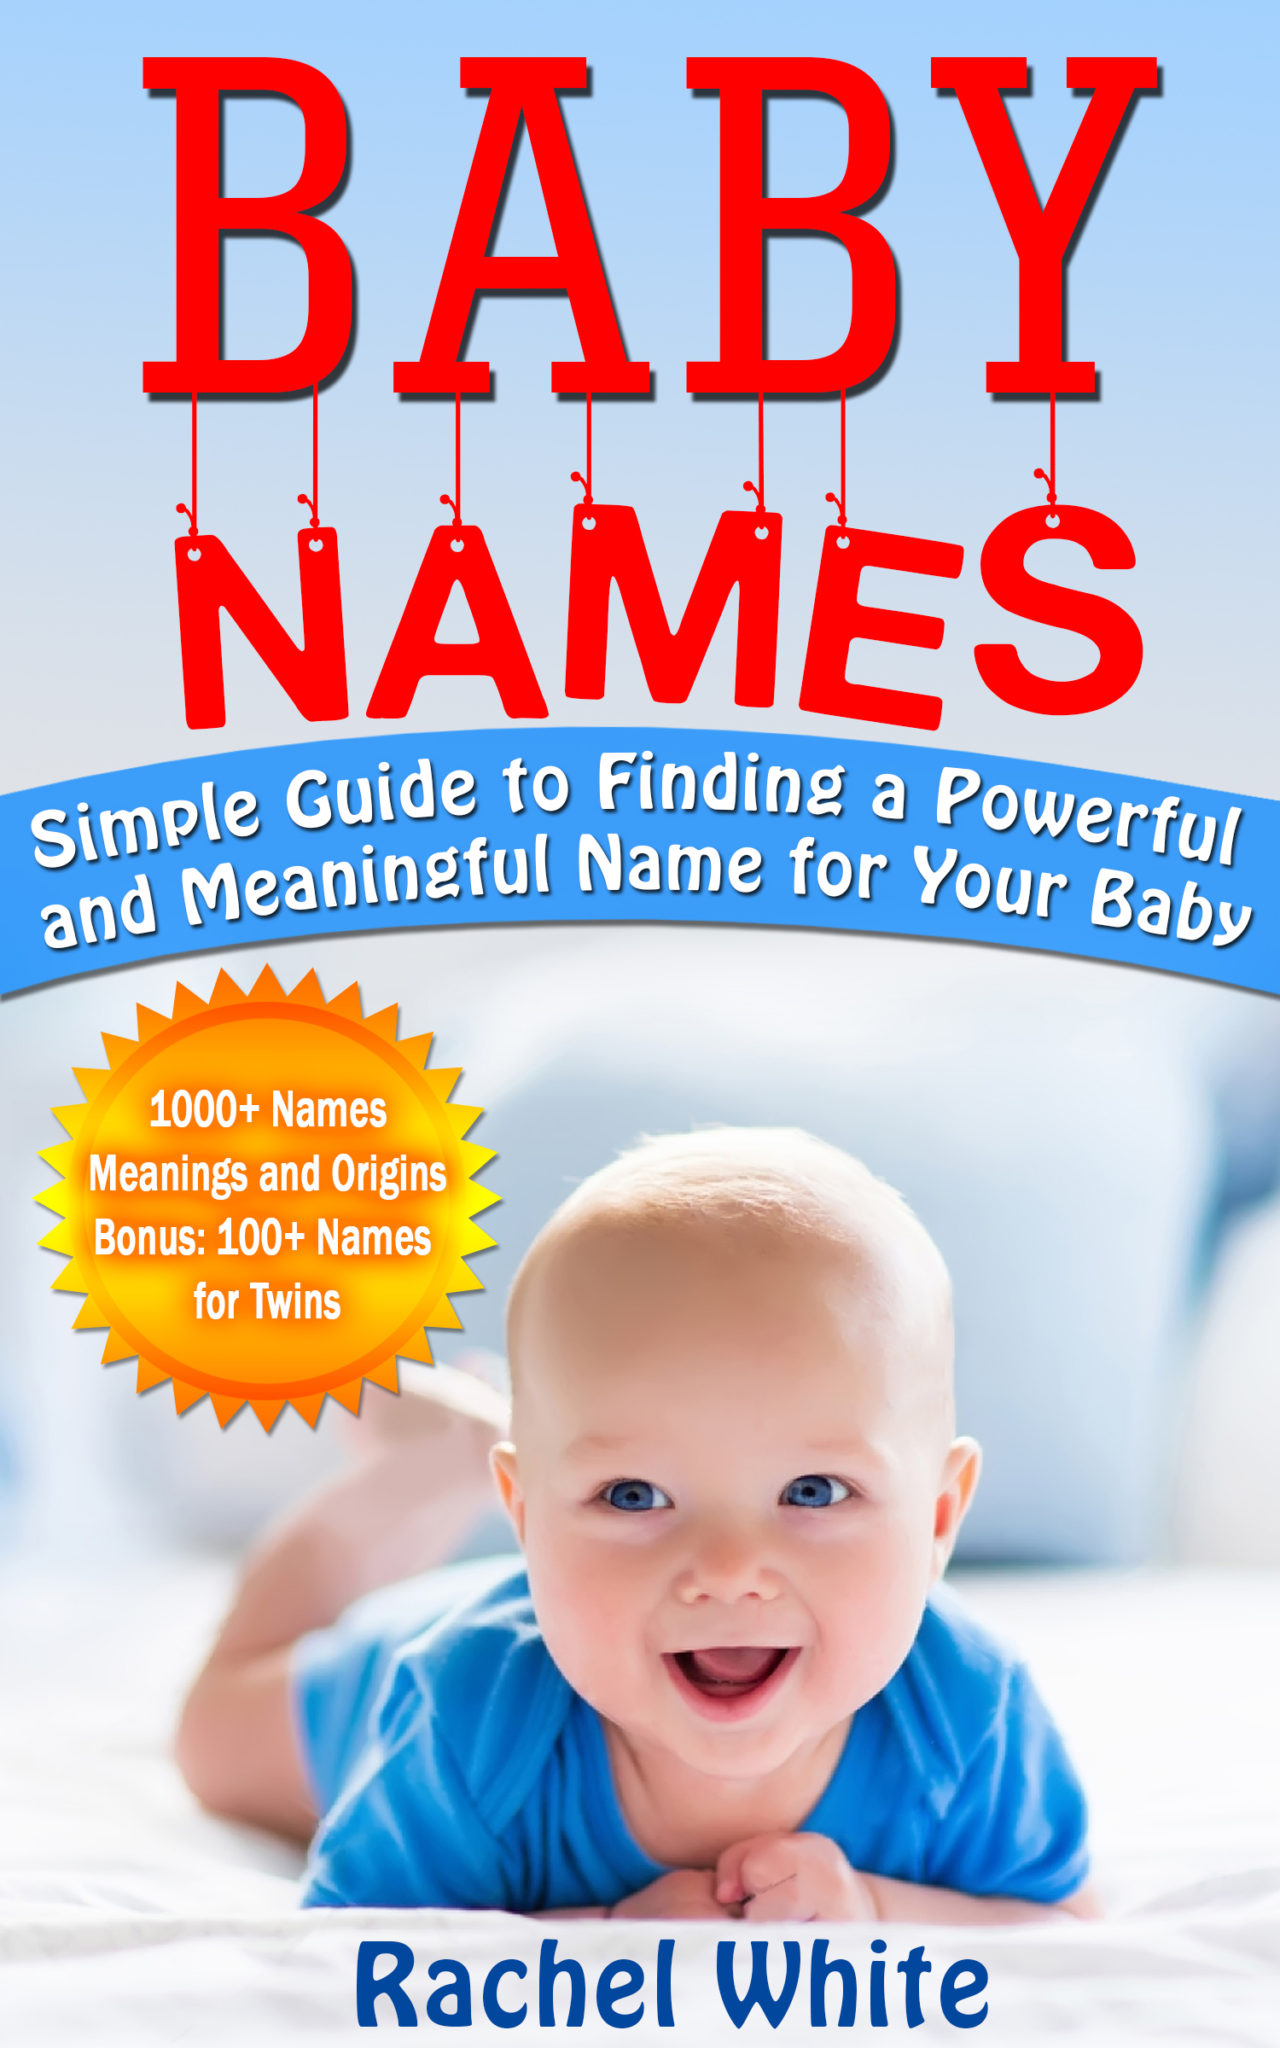 FREE: Baby Names: Simple Guide to Finding a Powerful and Meaningful Name for Your Baby by Rainer Puhmas